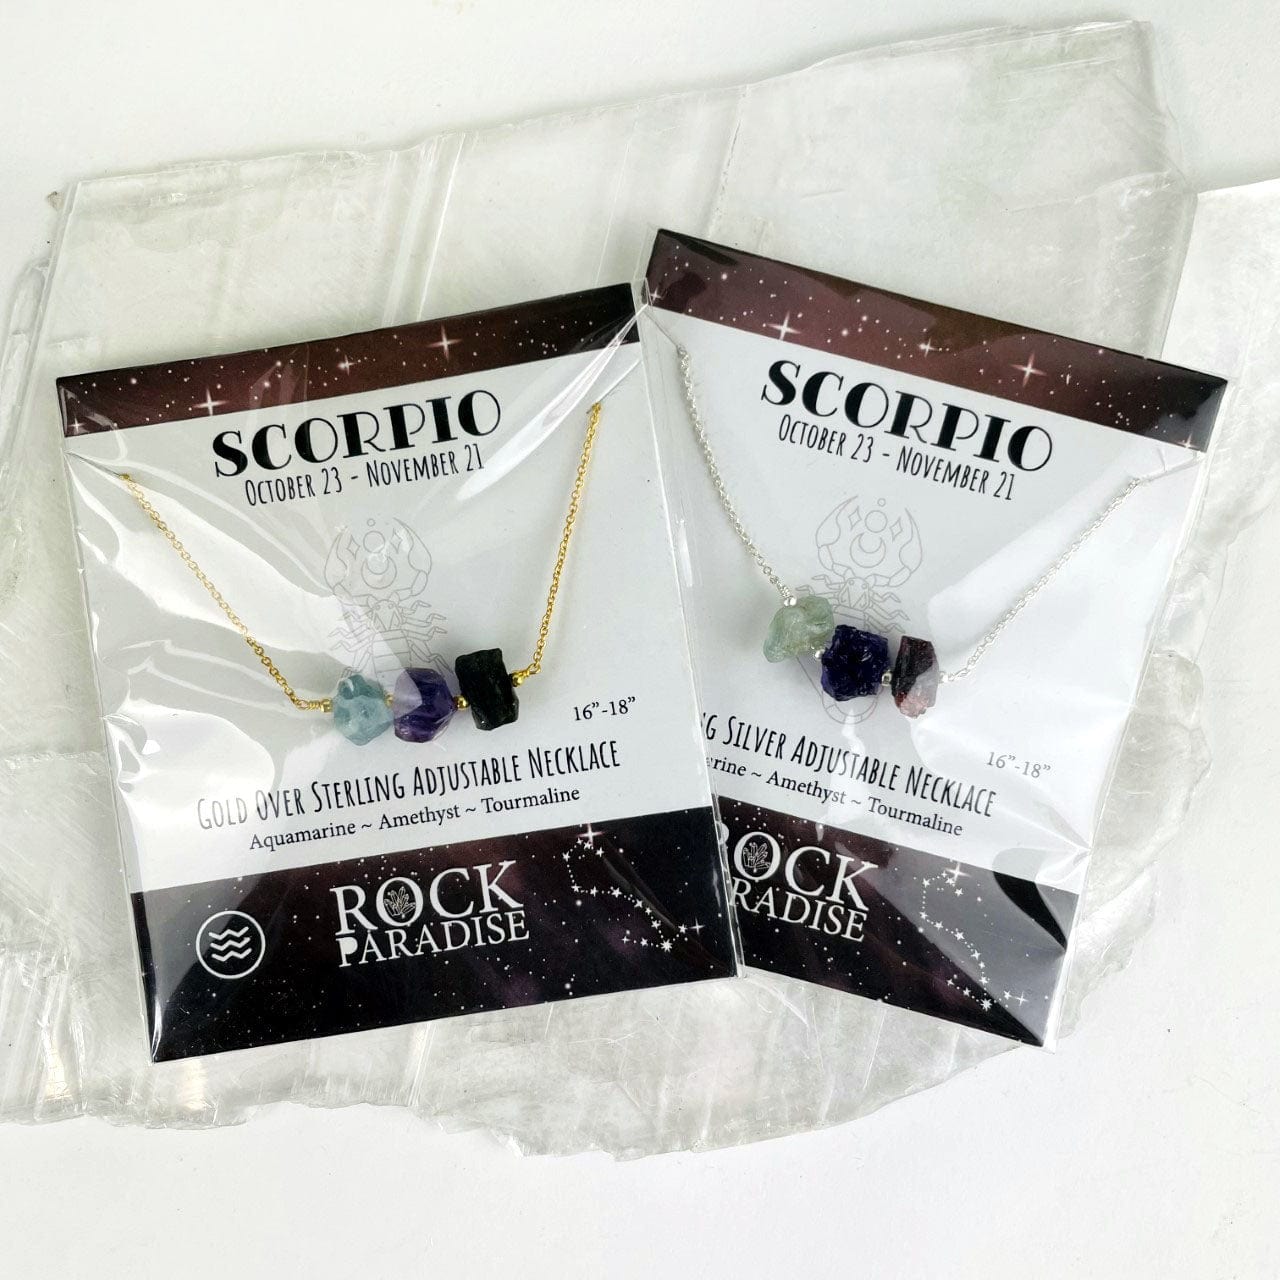 Scorpio Necklace - 3 Stones for your Zodiac Sign  - Gold over Sterling or Sterling Silver Adjustable Length in package